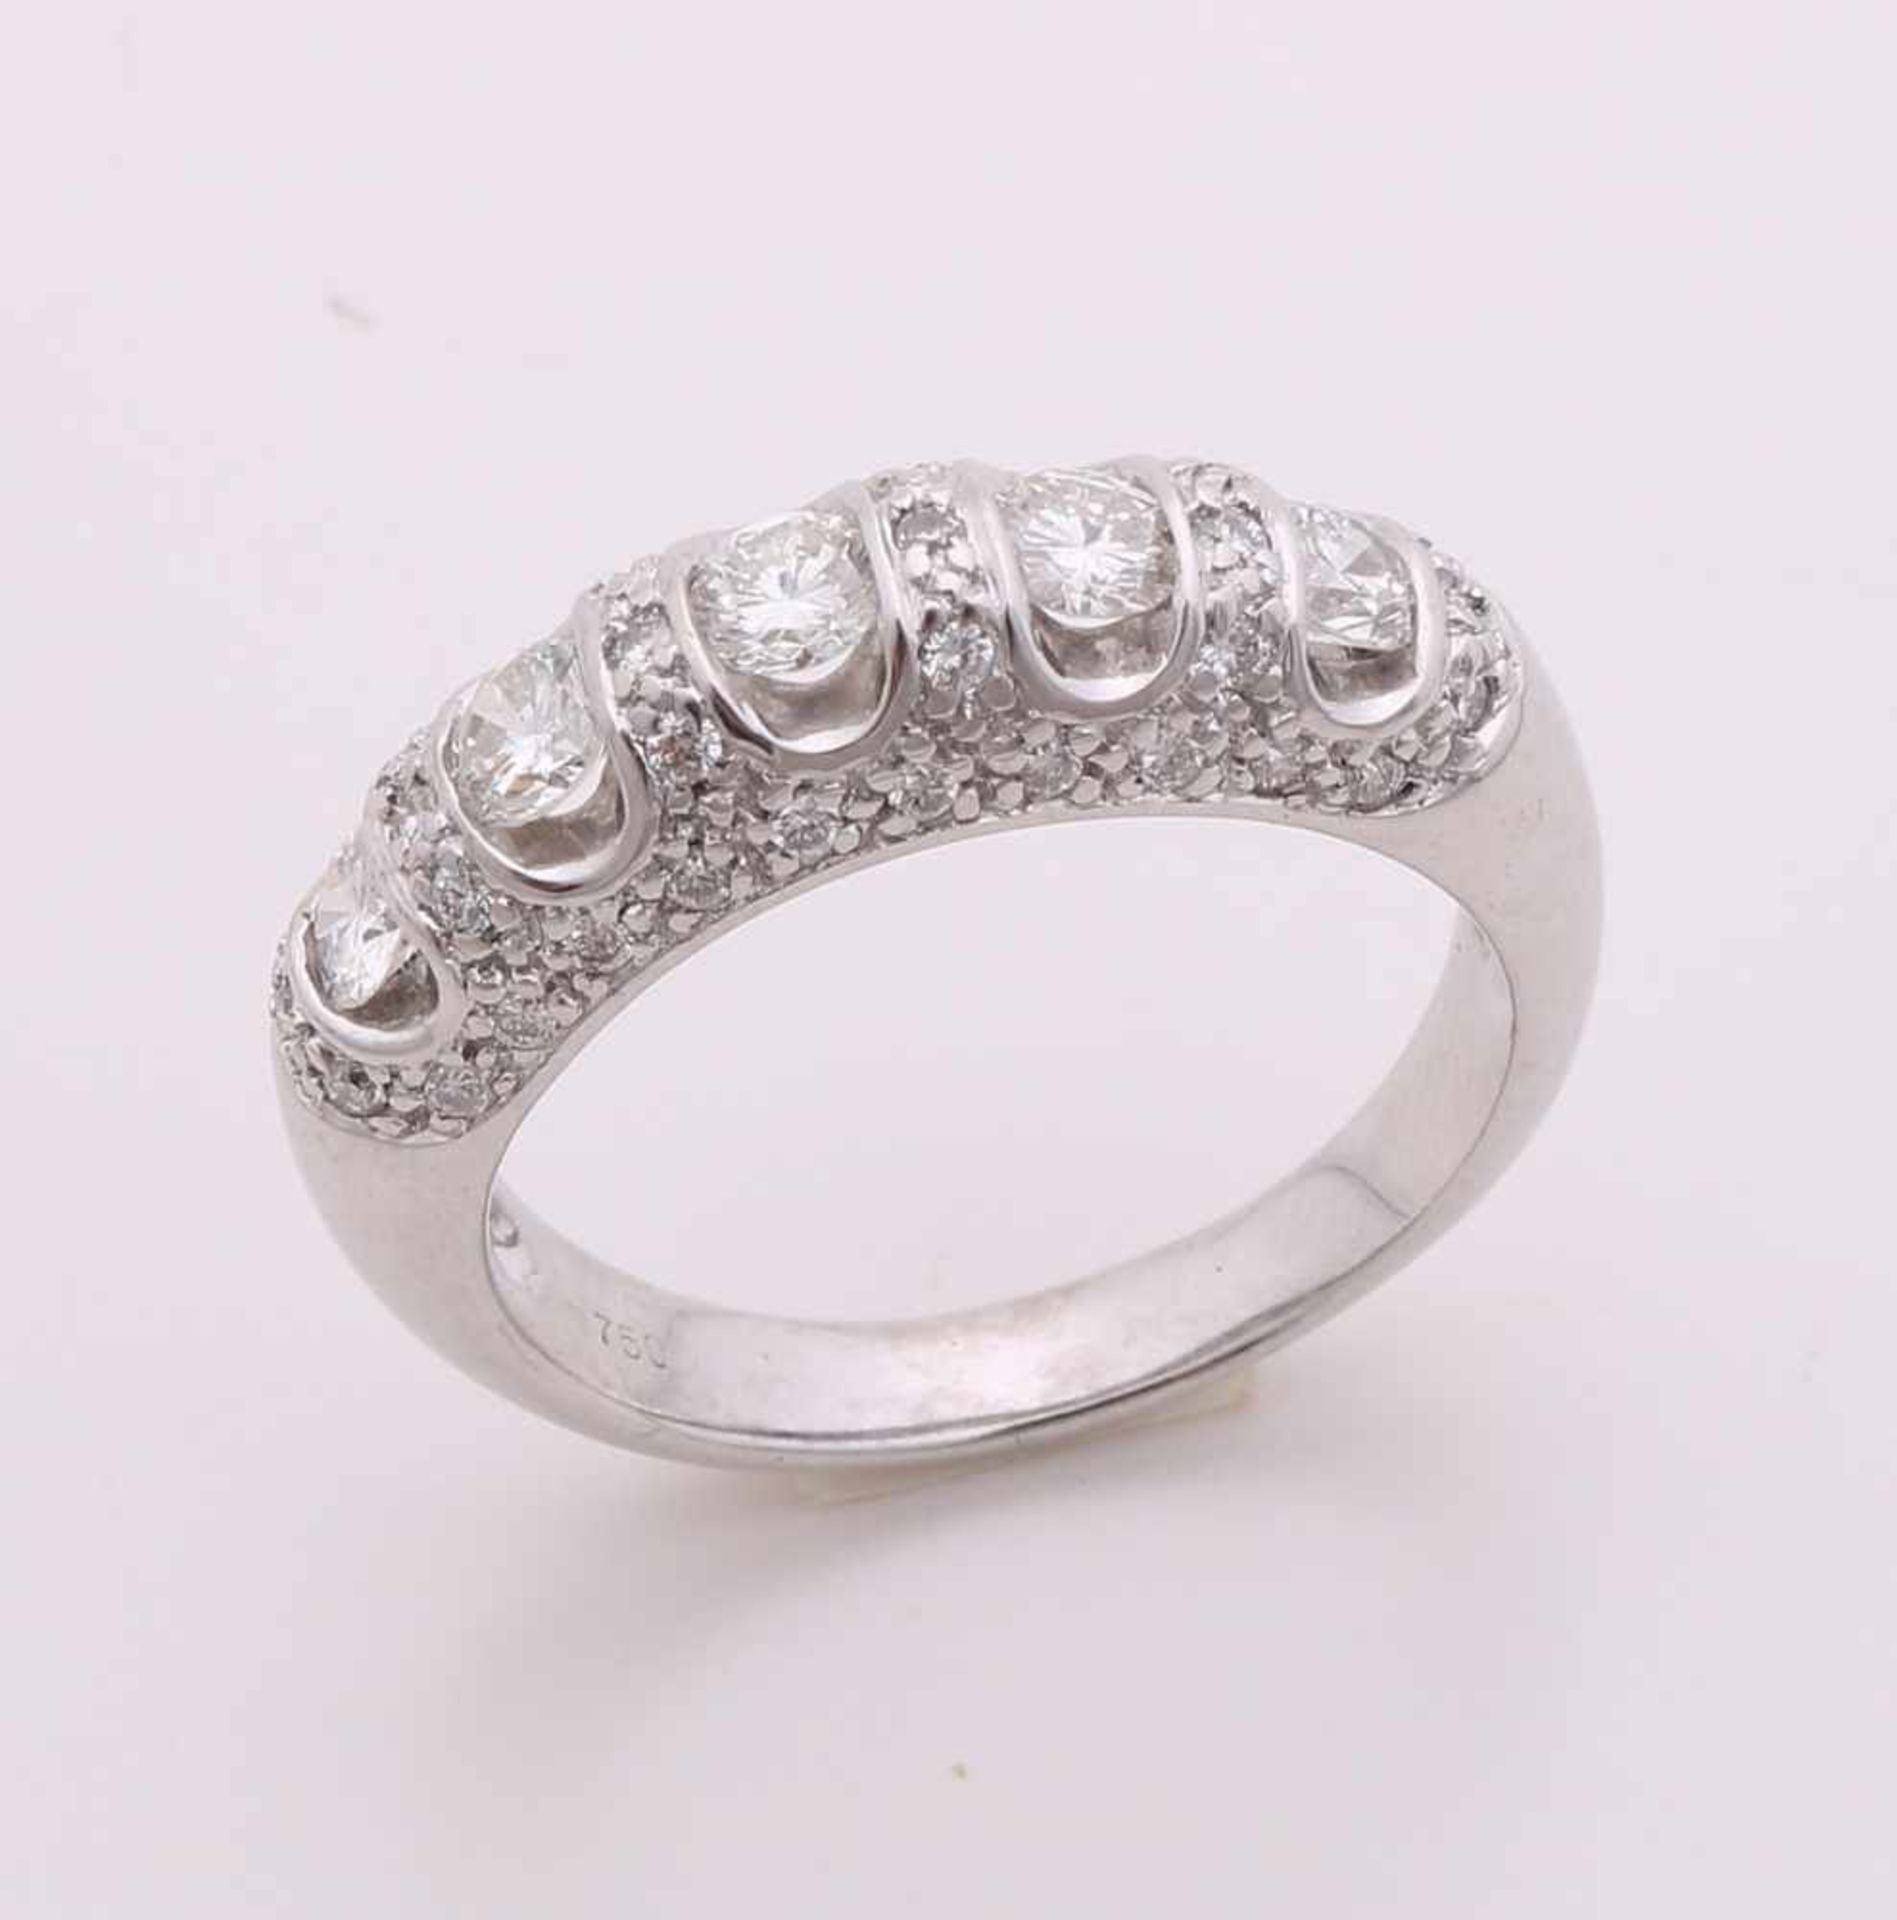 Very nice white gold ring, 750/000, royal set with diamond. Convex ring with a row set with 5